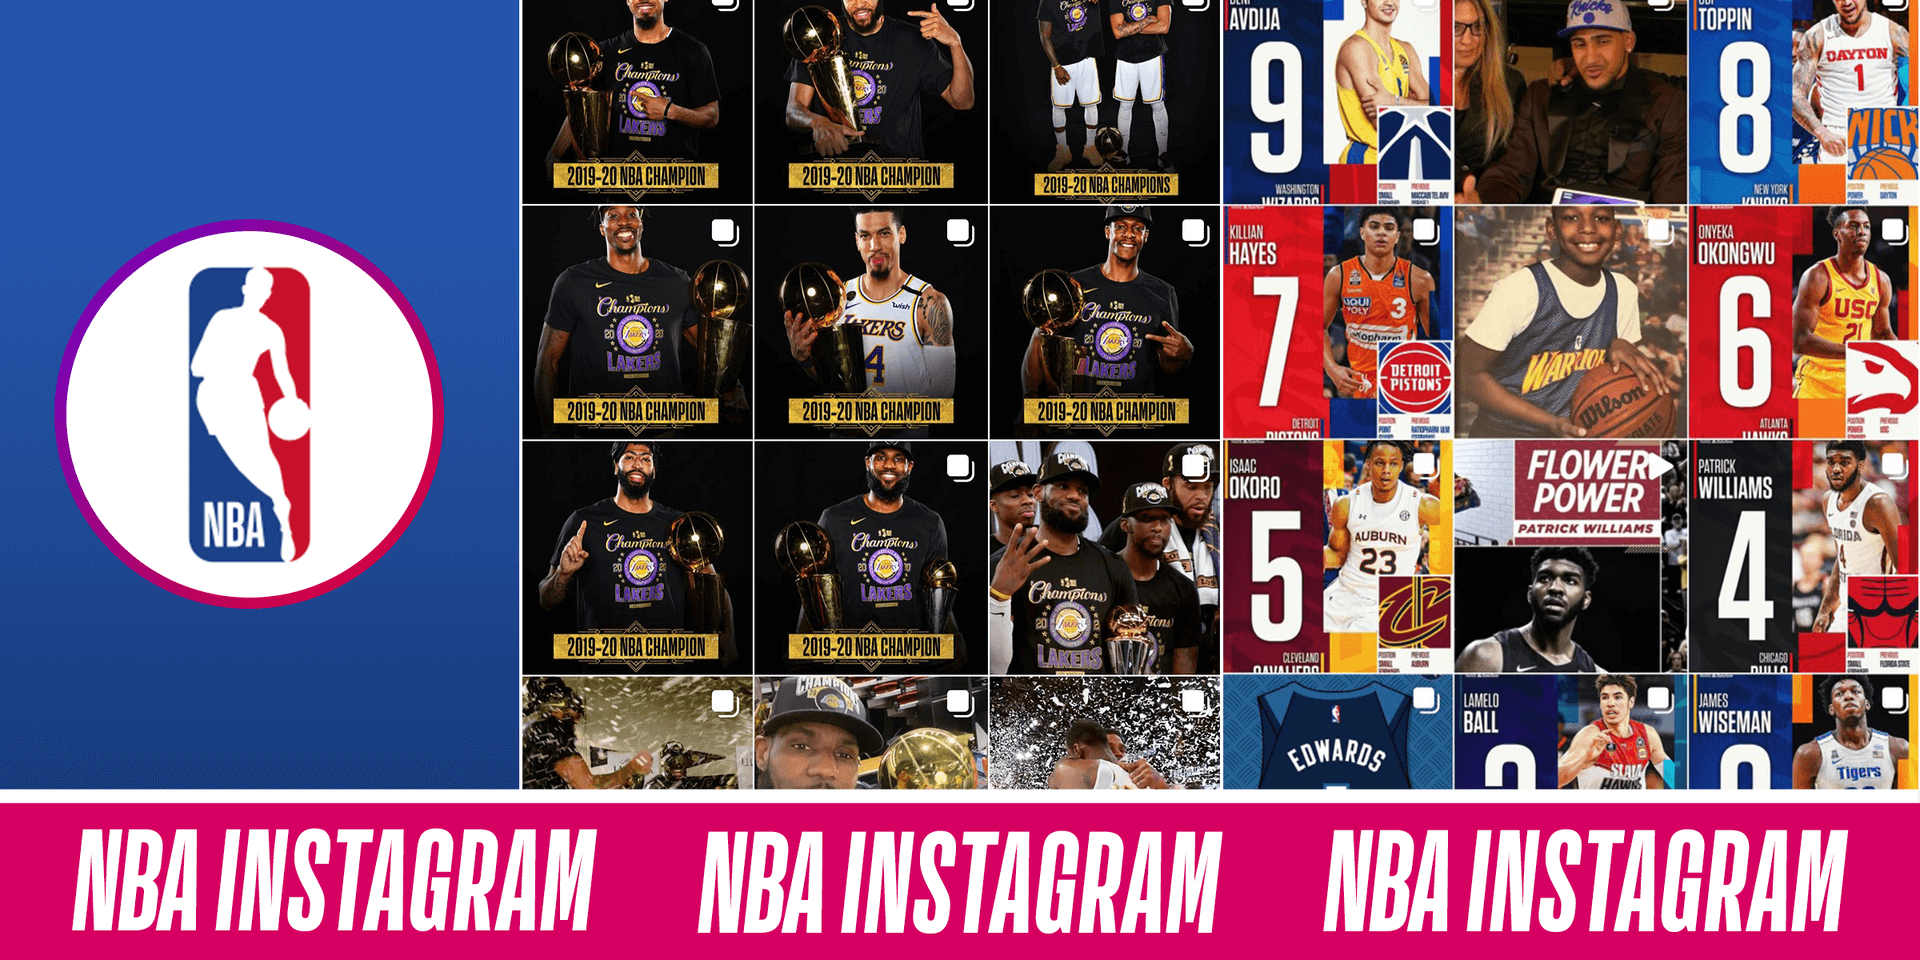 NBA Instagram’s Highest-Performing Year Ever